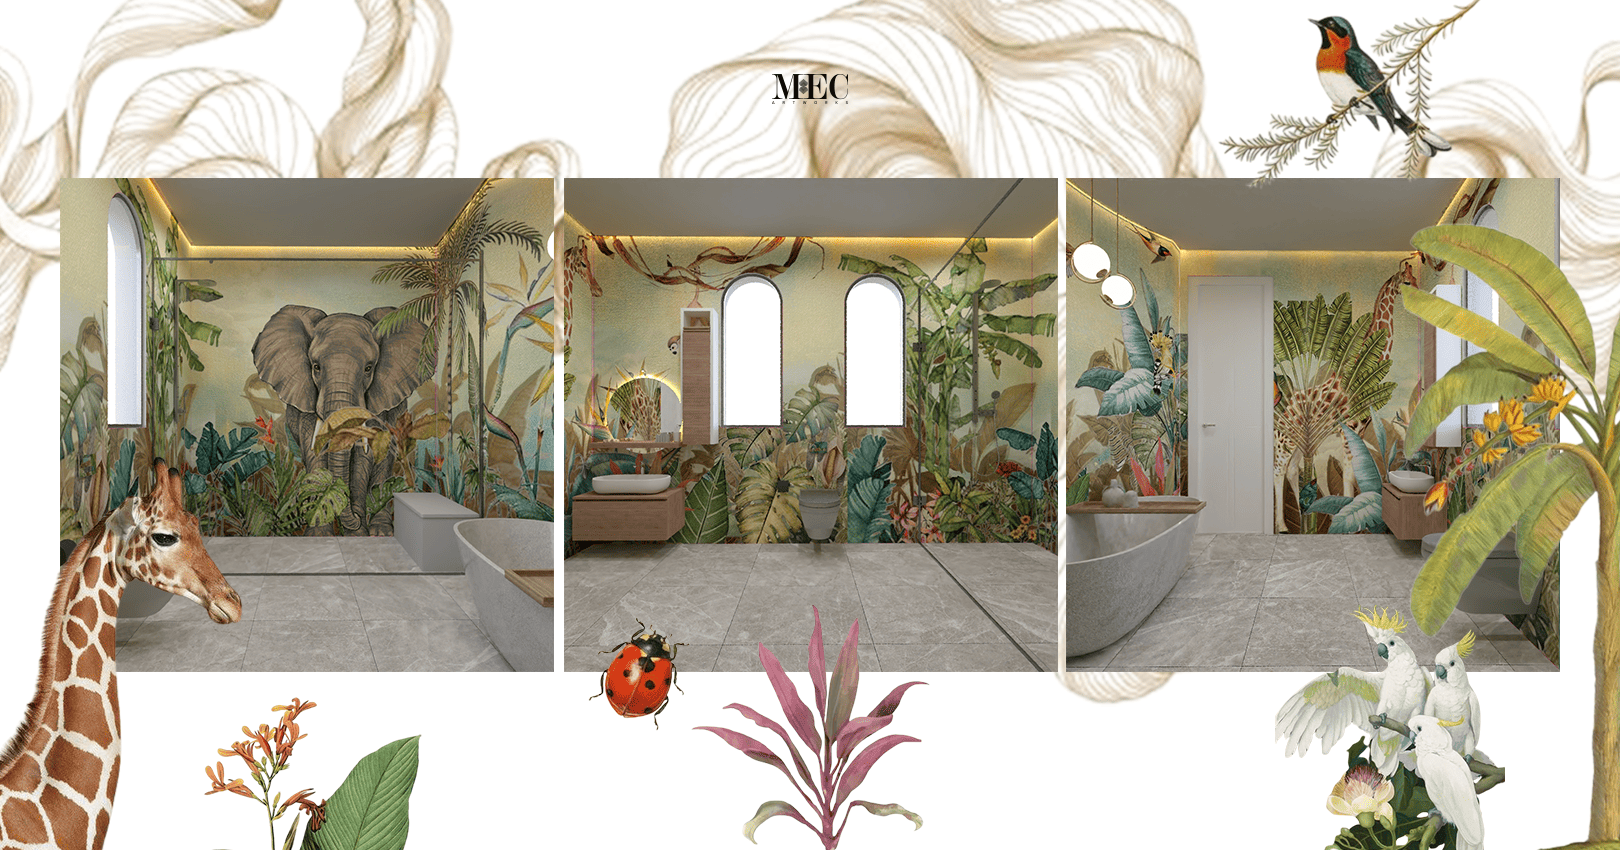 Luxurious bathroom with jungle-themed mosaic mural featuring animals and plants.